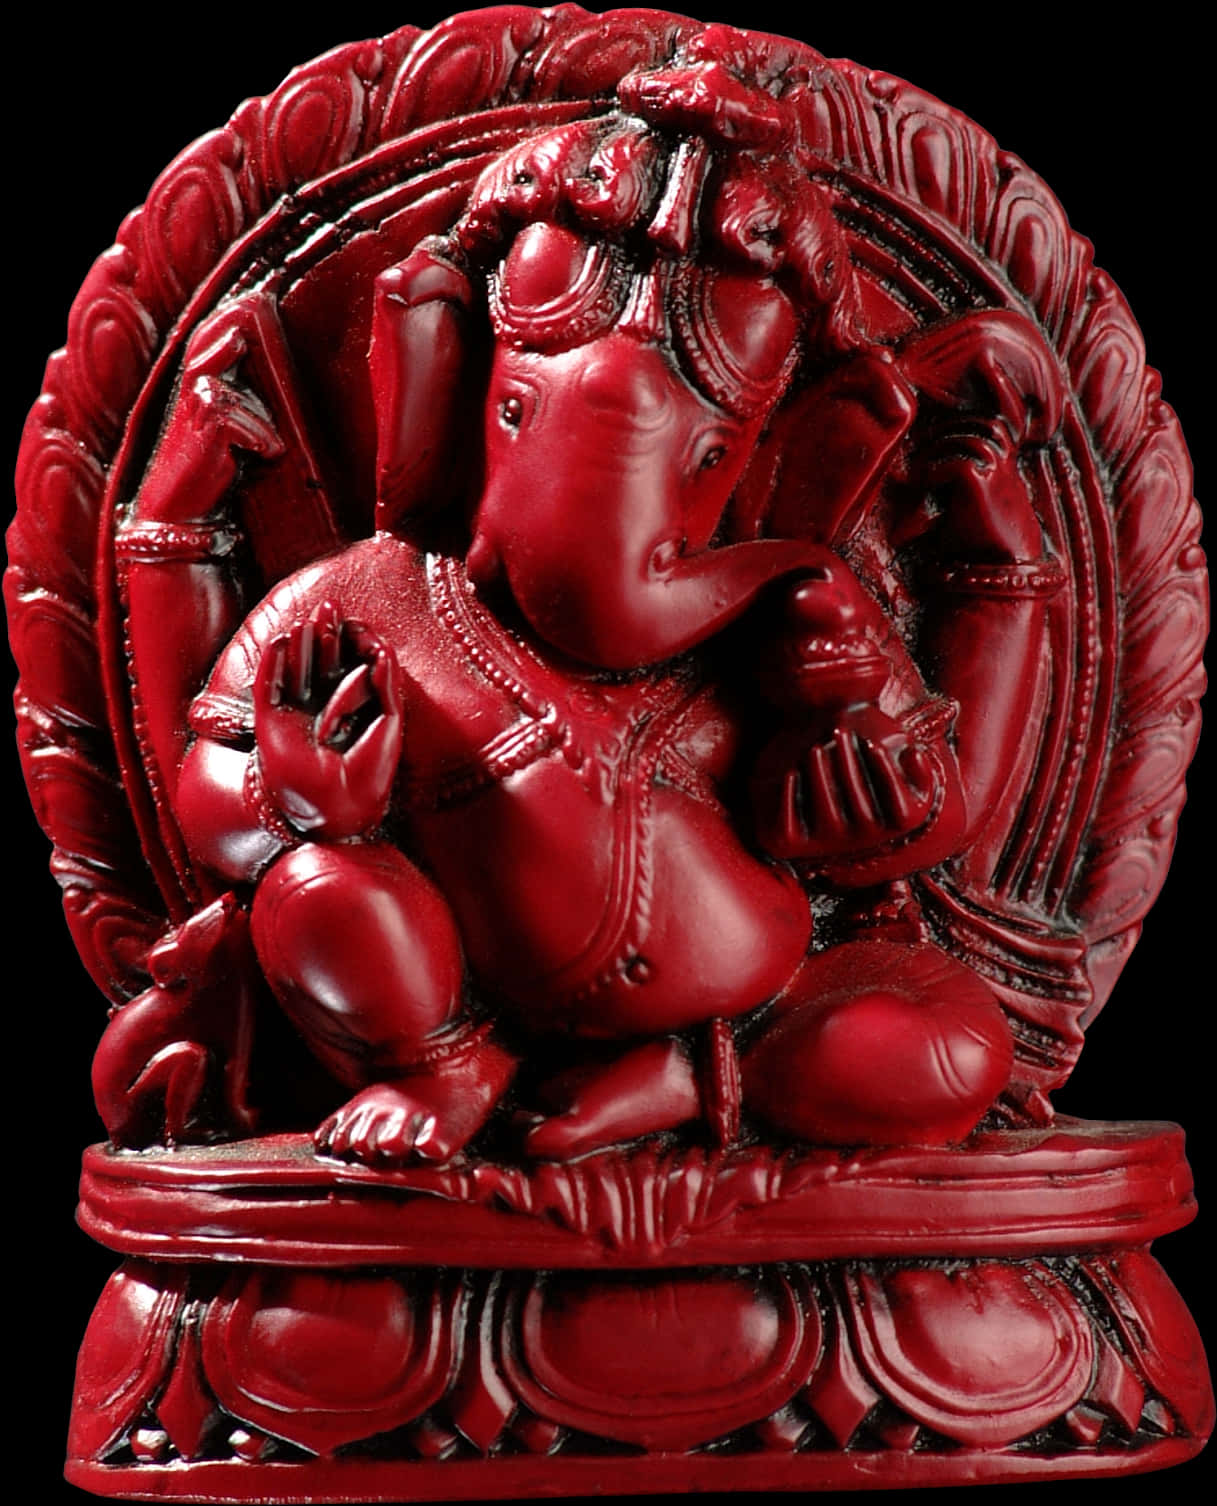 A Red Statue Of A God